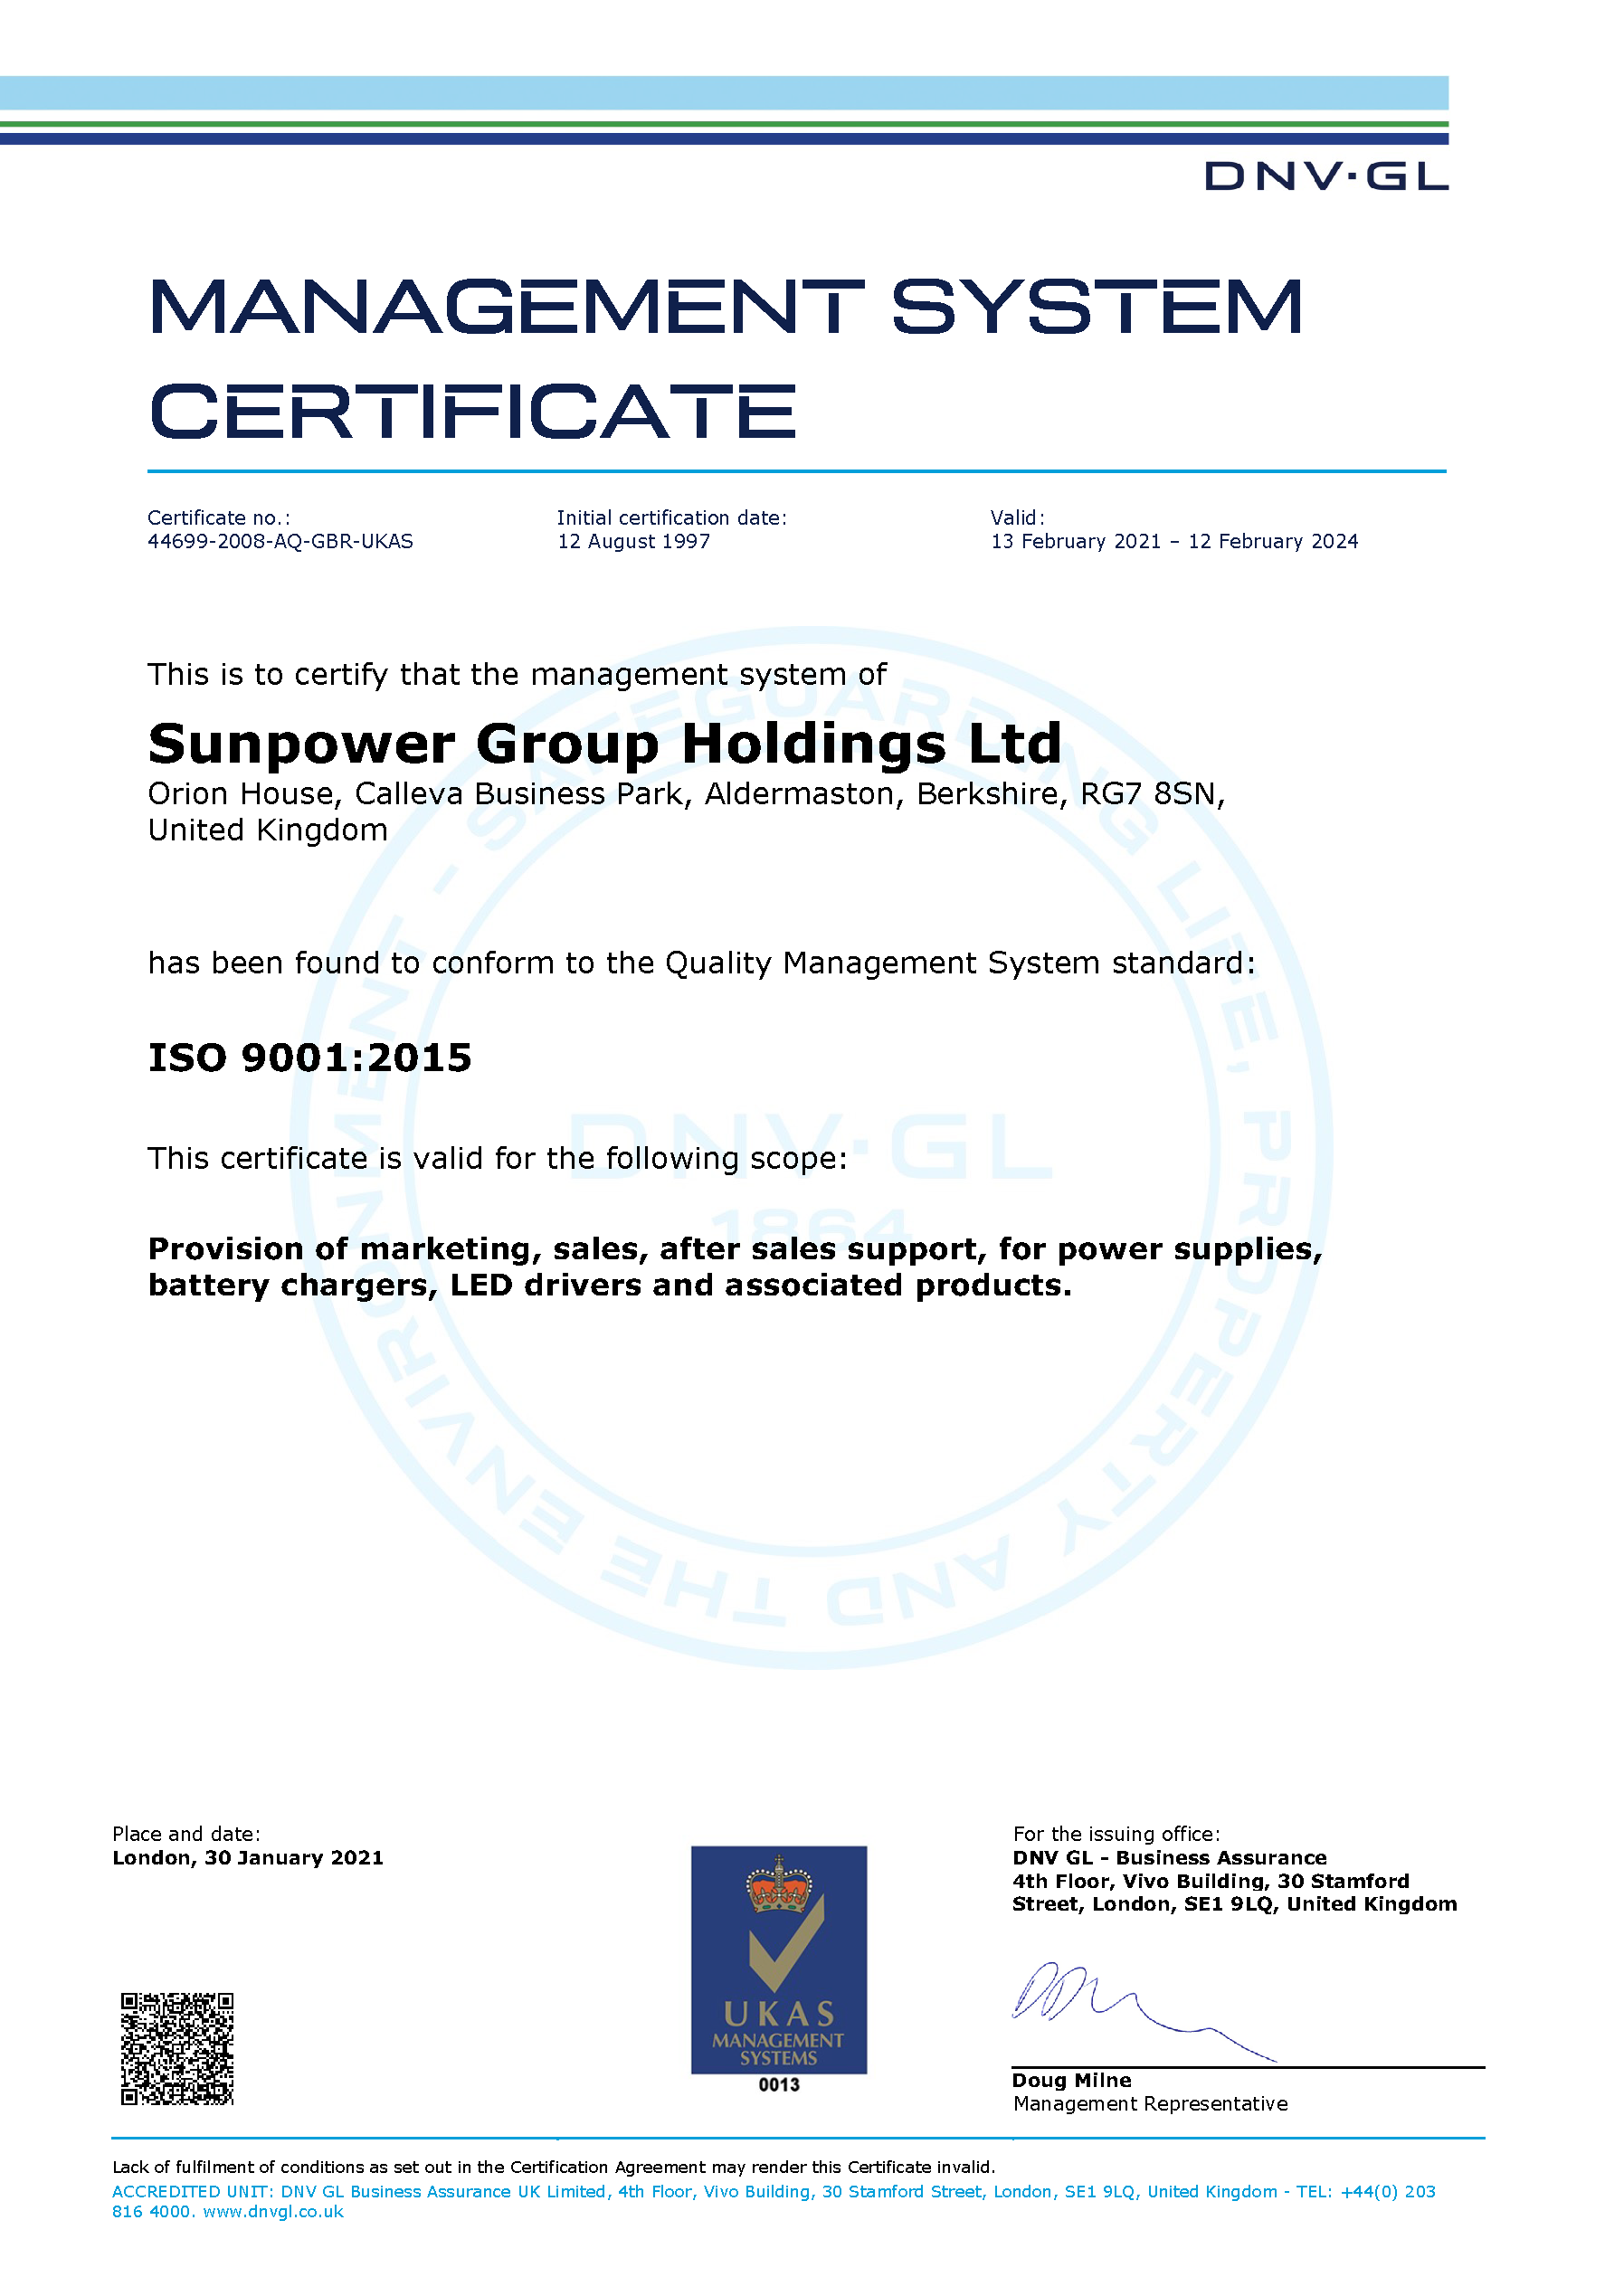 Sunpower BS-EN-ISO 9001:2015 Quality Management System Certificate